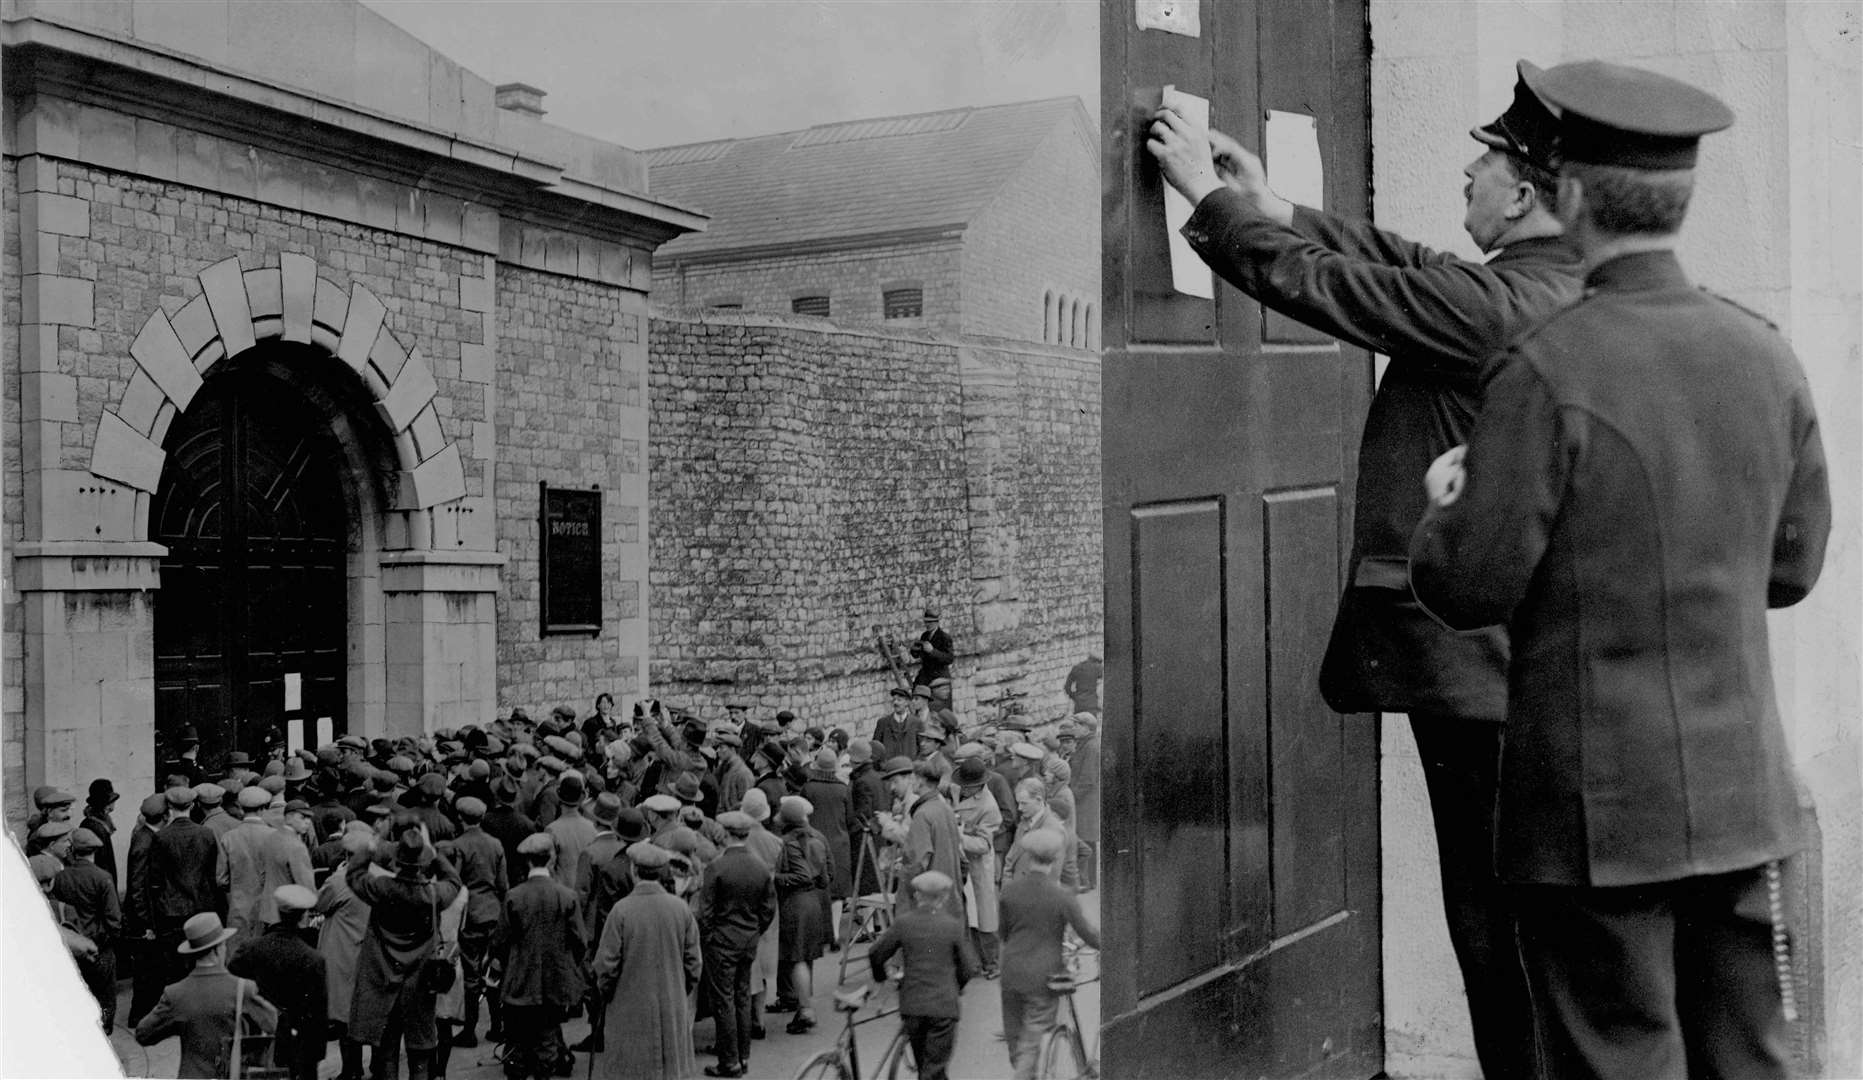 The notice of execution is nailed up outside Maidstone Prison in April 1930